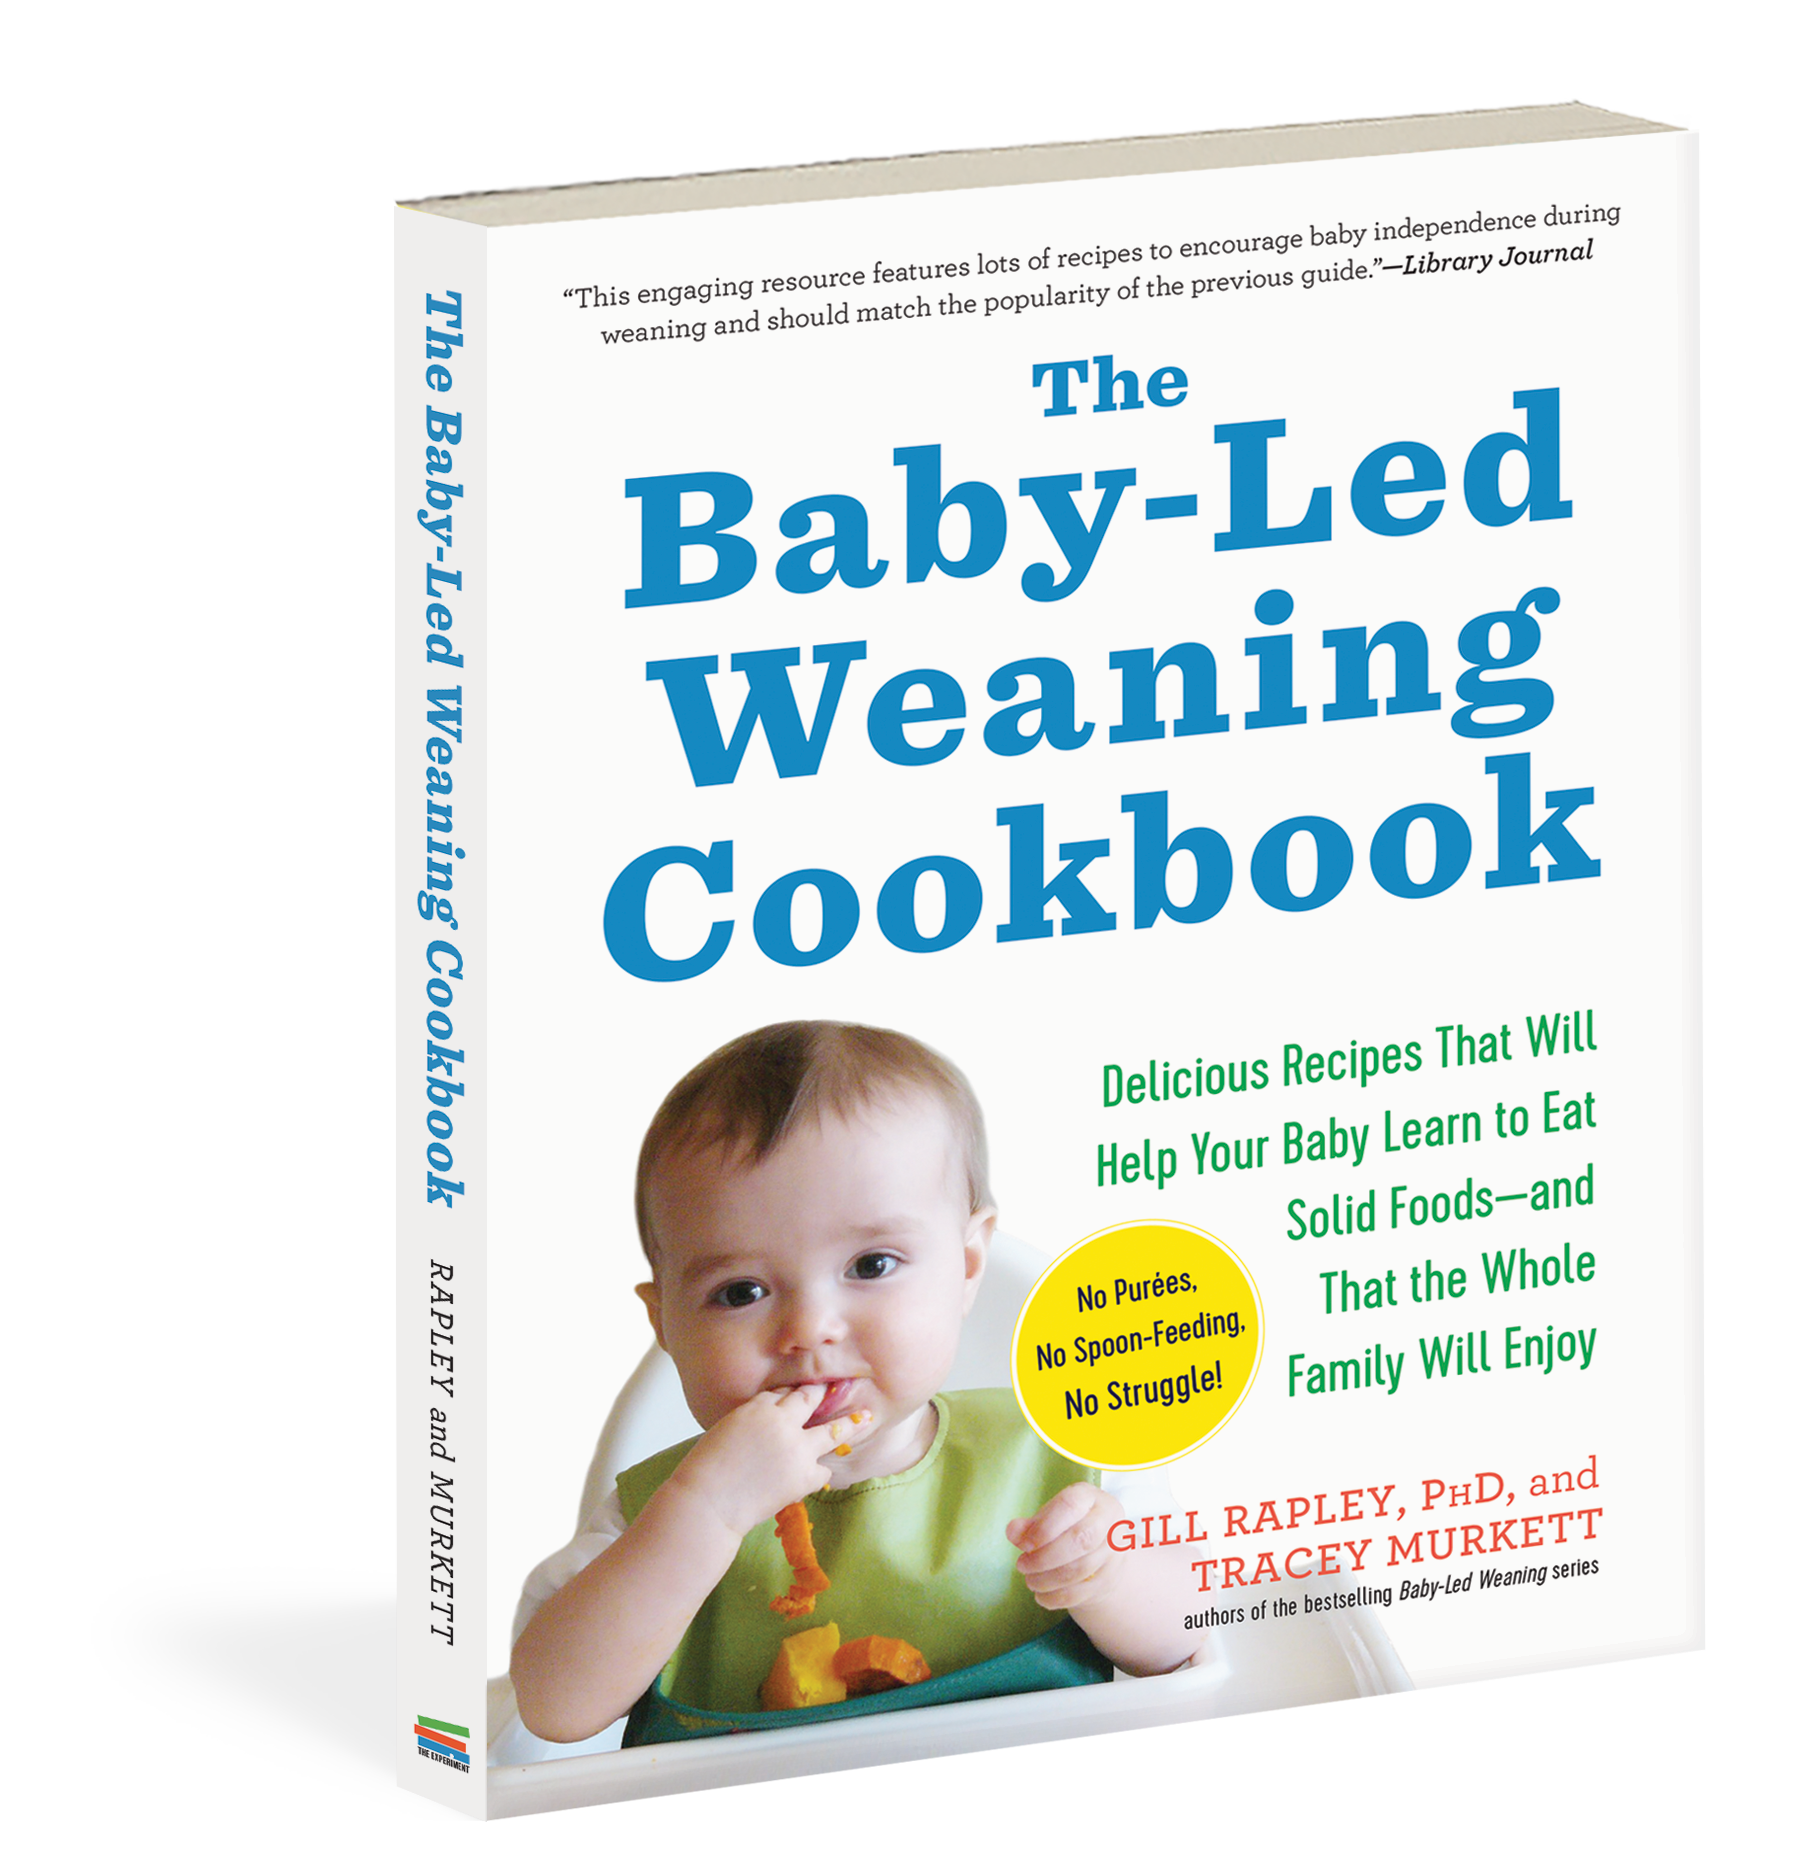 baby led weaning book